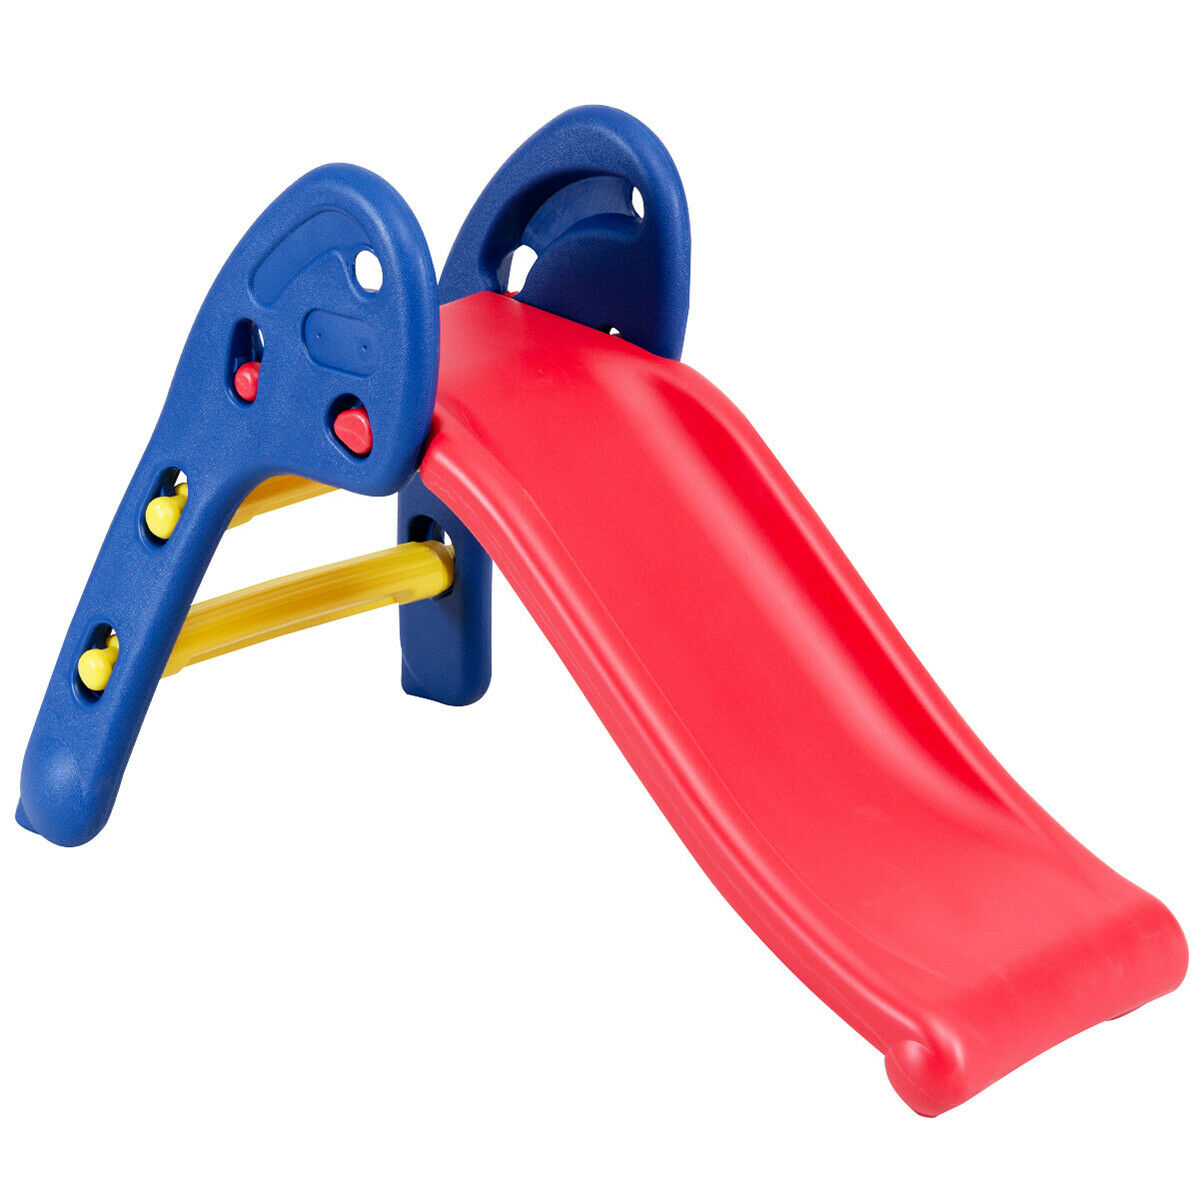 Gymax 2 Step Children Folding Slide Plastic Fun Toy Up-down For Kids Indoor & Outdoor - image 1 of 10